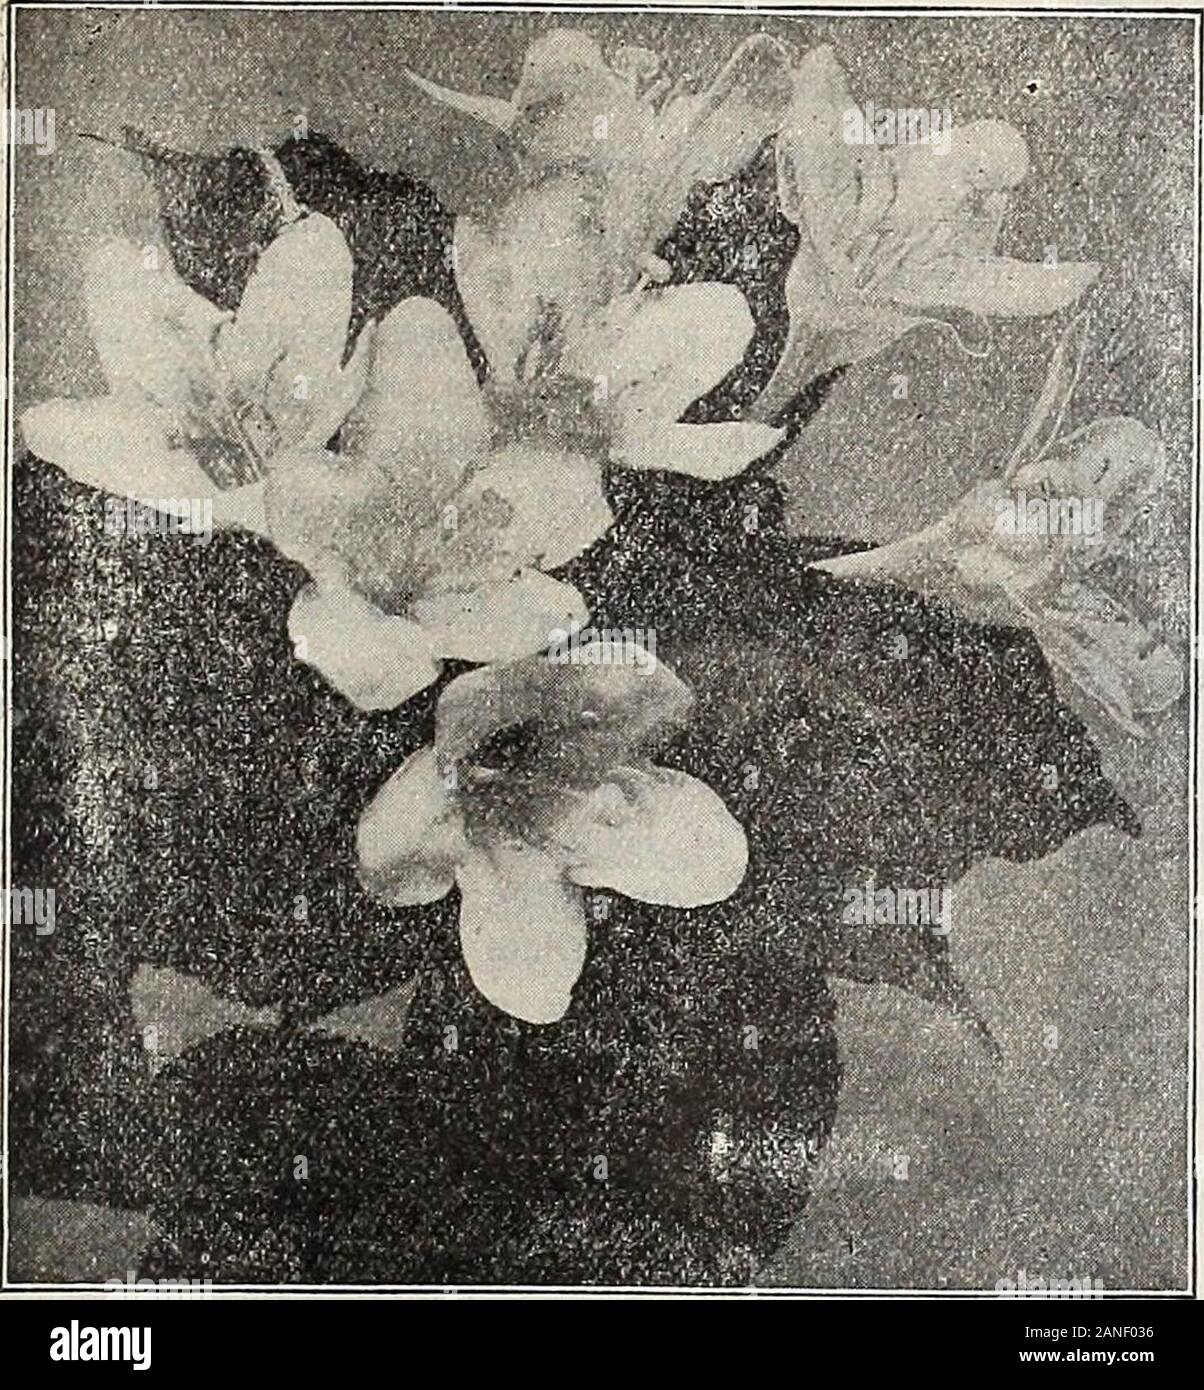 Dreer's 72nd annual edition garden book : 1910 . 225. Weigelia Rosea. Weigelia. Well-known, popular, free-flowerinp; Shrubs, pro-ducing trumpet-shaped flowers olmany sh;.dcs of color duringJune and July. — AntEbilis. A Ijeautiful and distinct pink. 25 cts. each. — Candida. Fine pure white ; flowers of large size. 25 cts.each. — Rosea. Soft rosy carmine. (See cut.) 25 cts. each. — Rosea Nana Variegata. A neat dwarf Shrub, valuablefor the clearly defined variegation of green, yellow and pinkin its leaves; very effective and useful; flowers delicate roseand pink; one of the finest variegated-leav Stock Photo